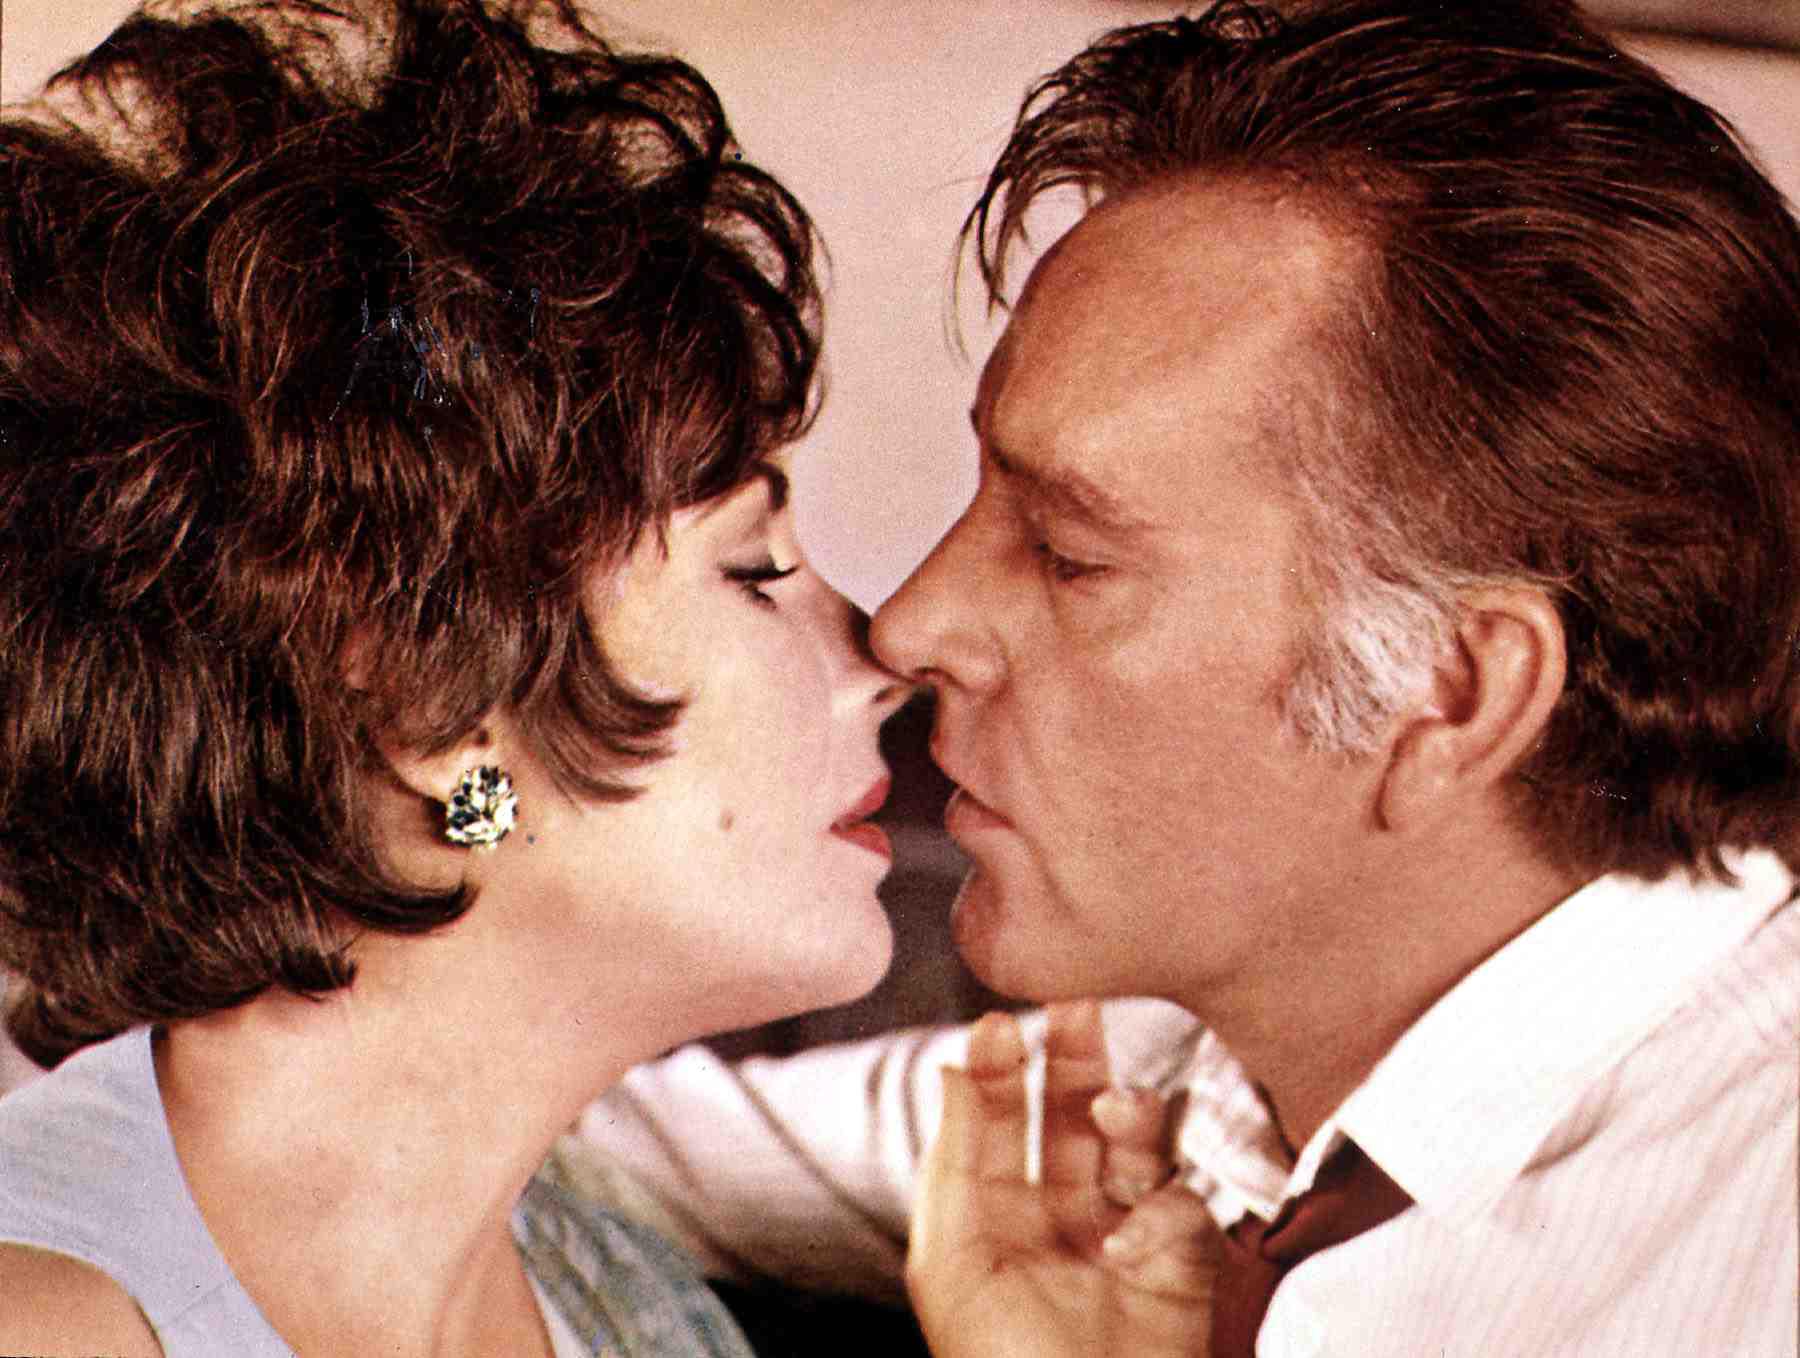 Elizabeth Taylor and Richard Burton in 1967. | Source: Getty Images